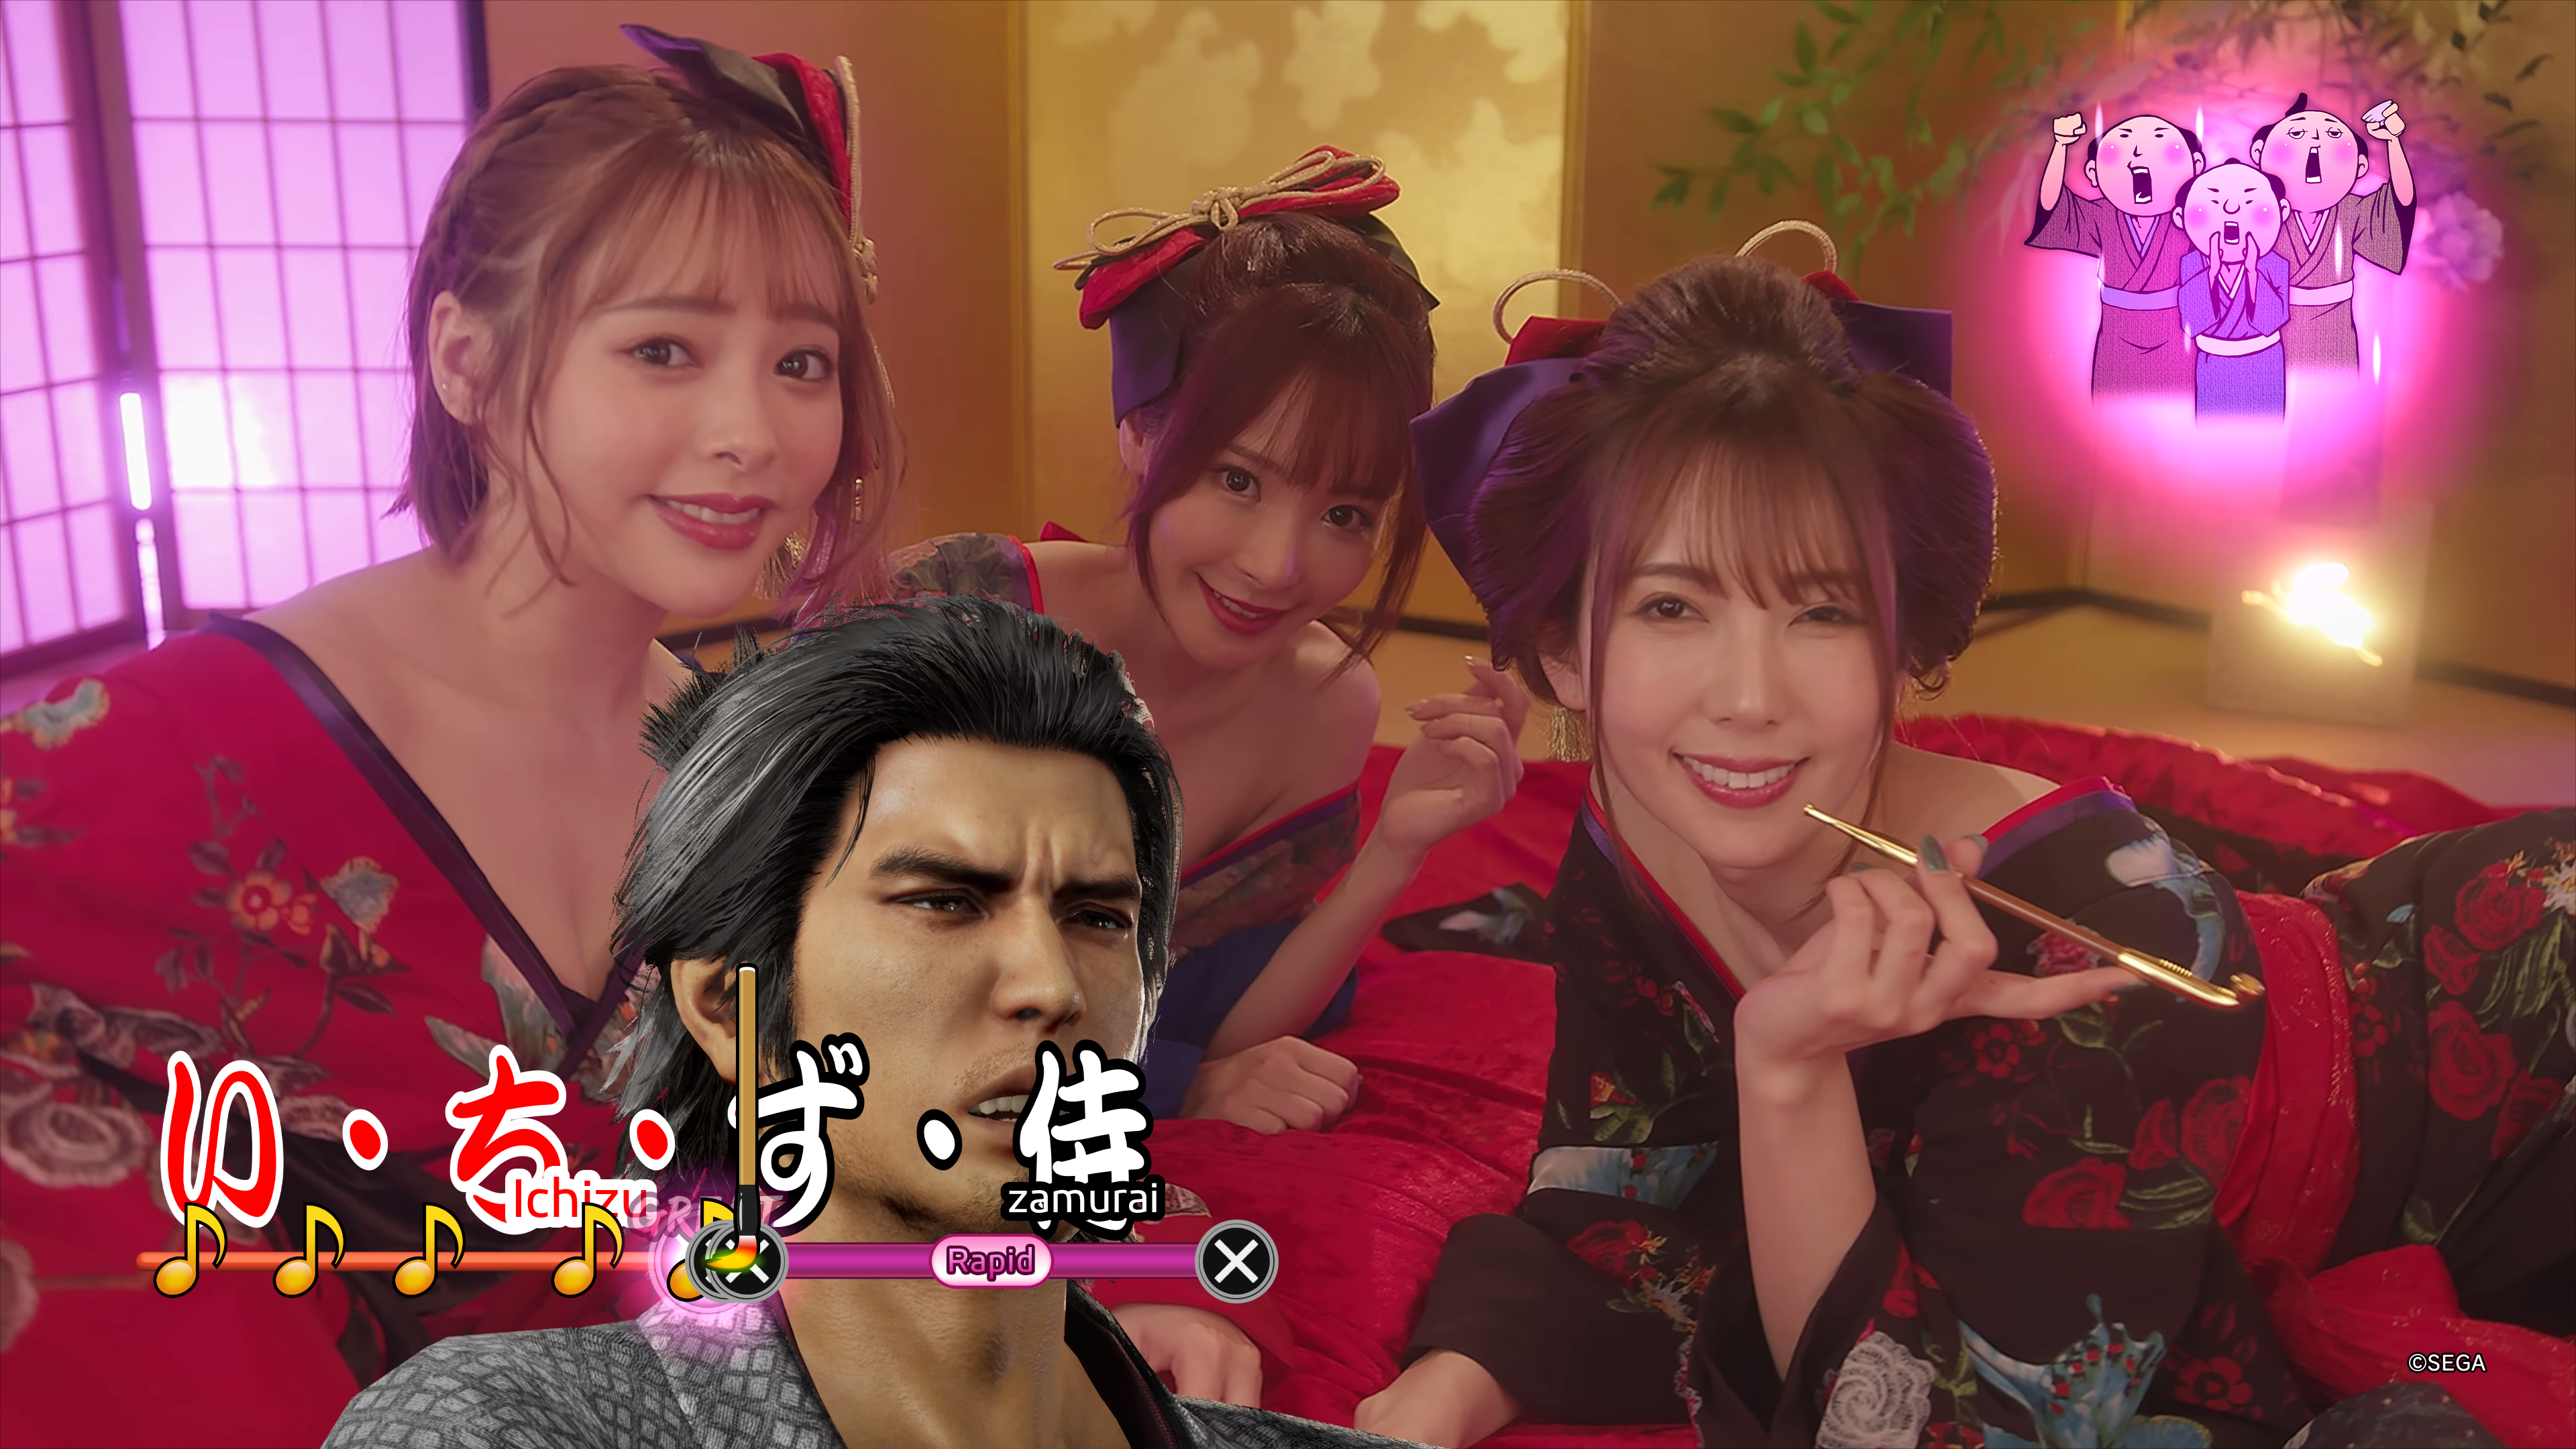 Just like Dragon Ishin commented - Ryoma looks confused in front of a group of real women in a weird minigame